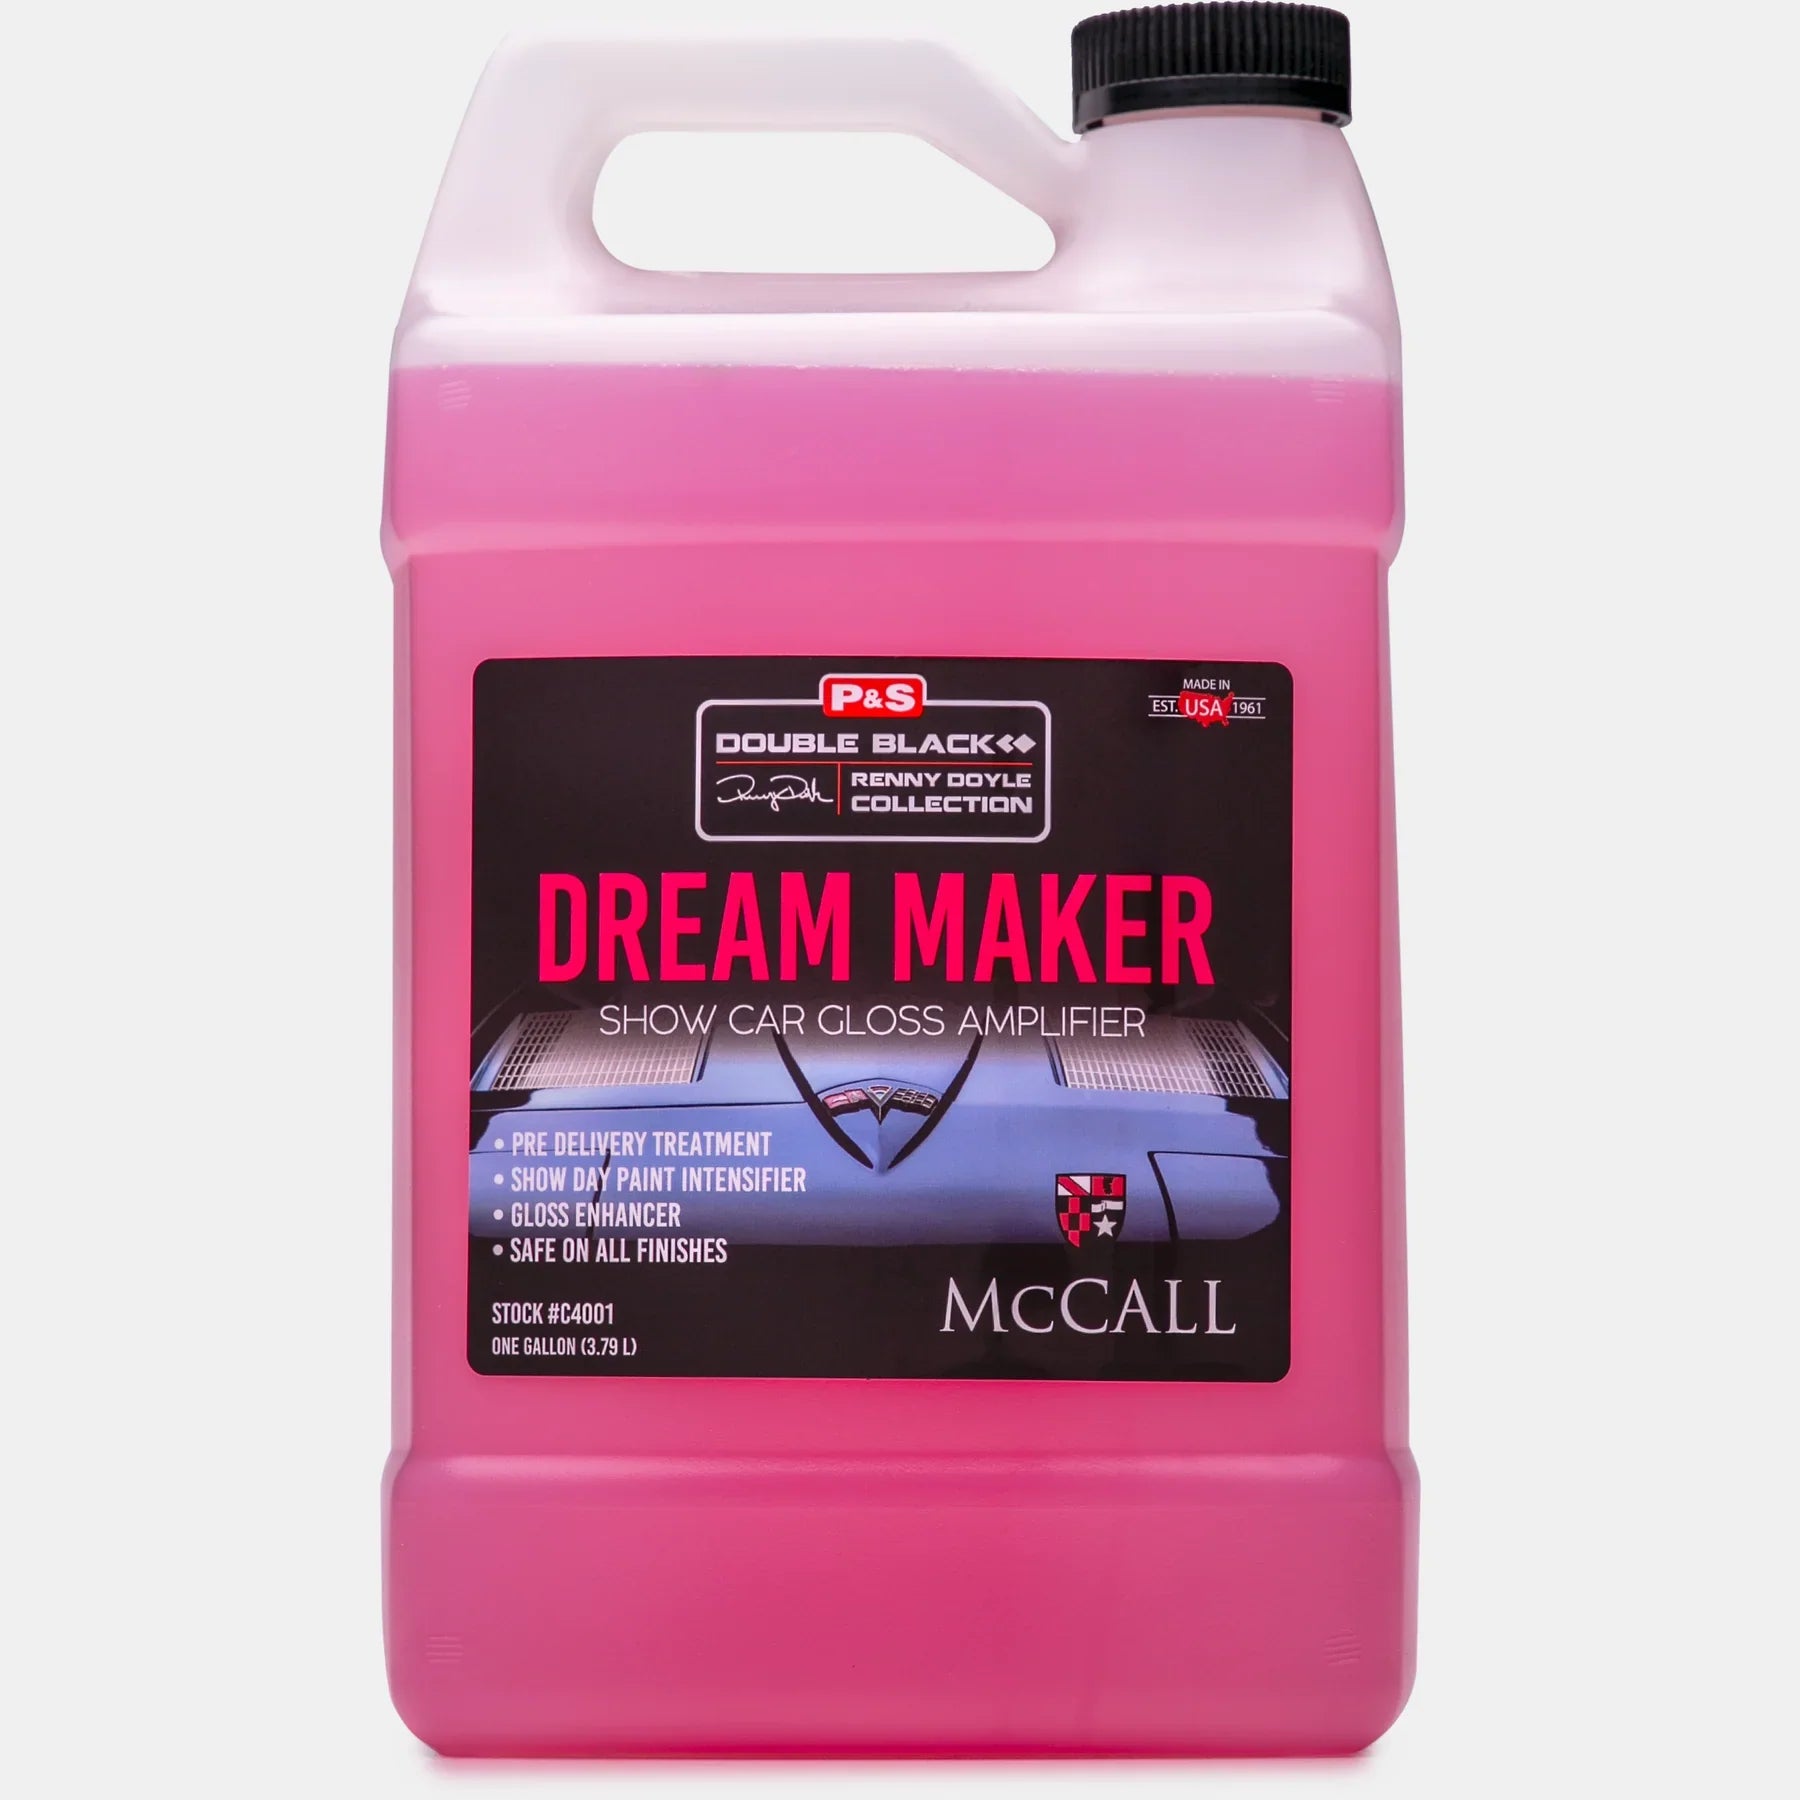 Gallon size container of P&S Detailing C4001 Dream Maker, emphasizing the bulk option for professional detailing services.